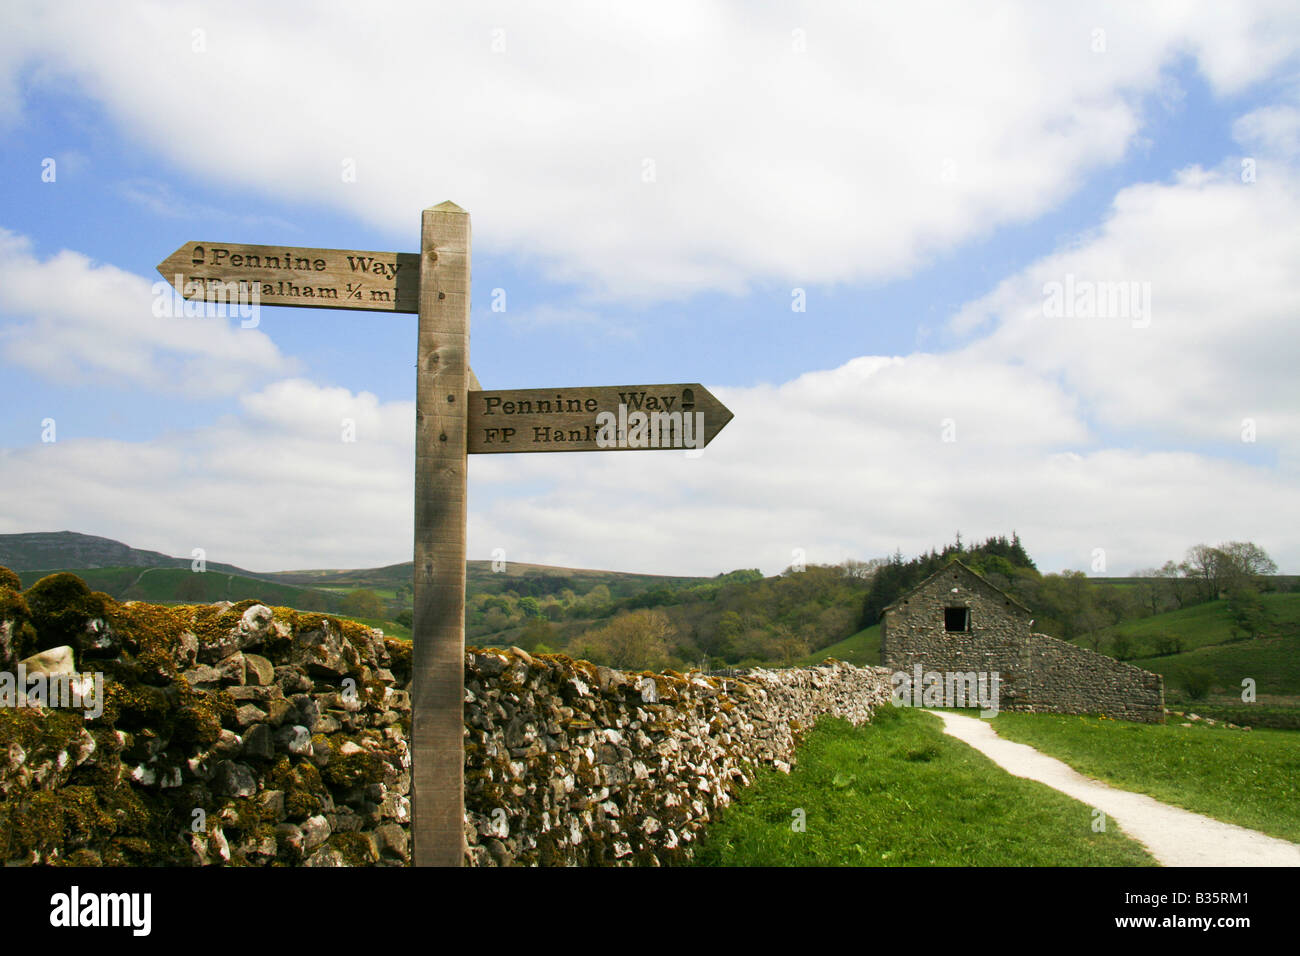 Sign for the Pennine Way, Malham and Hanlith, just outside the village of Malham in the North Yorkshire Dales National Park. Stock Photo